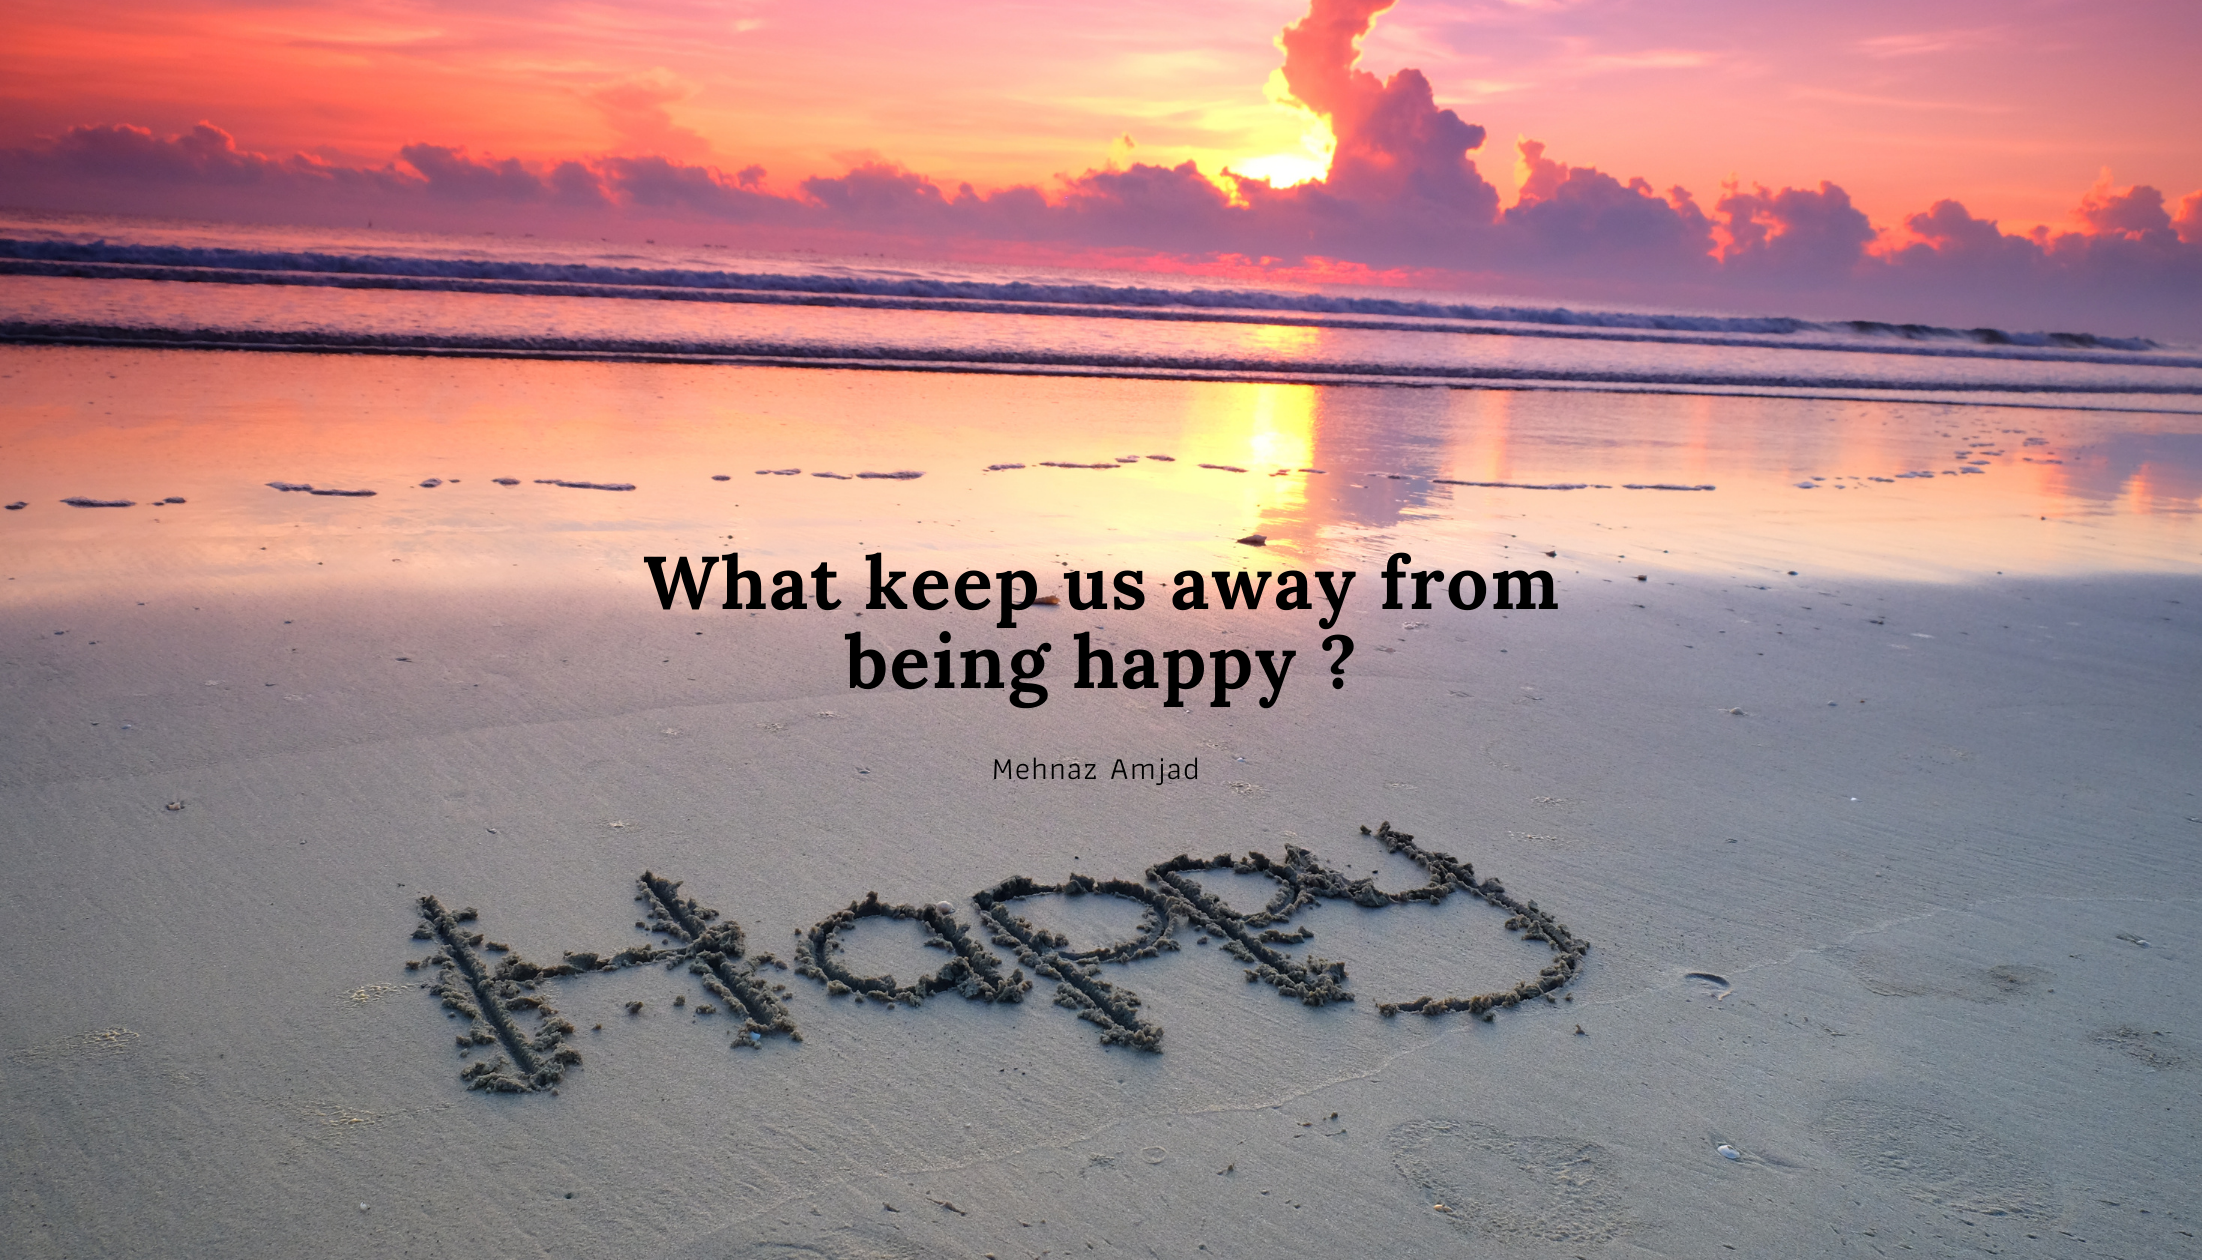 WHAT KEEP US AWAY FROM BEING HAPPY